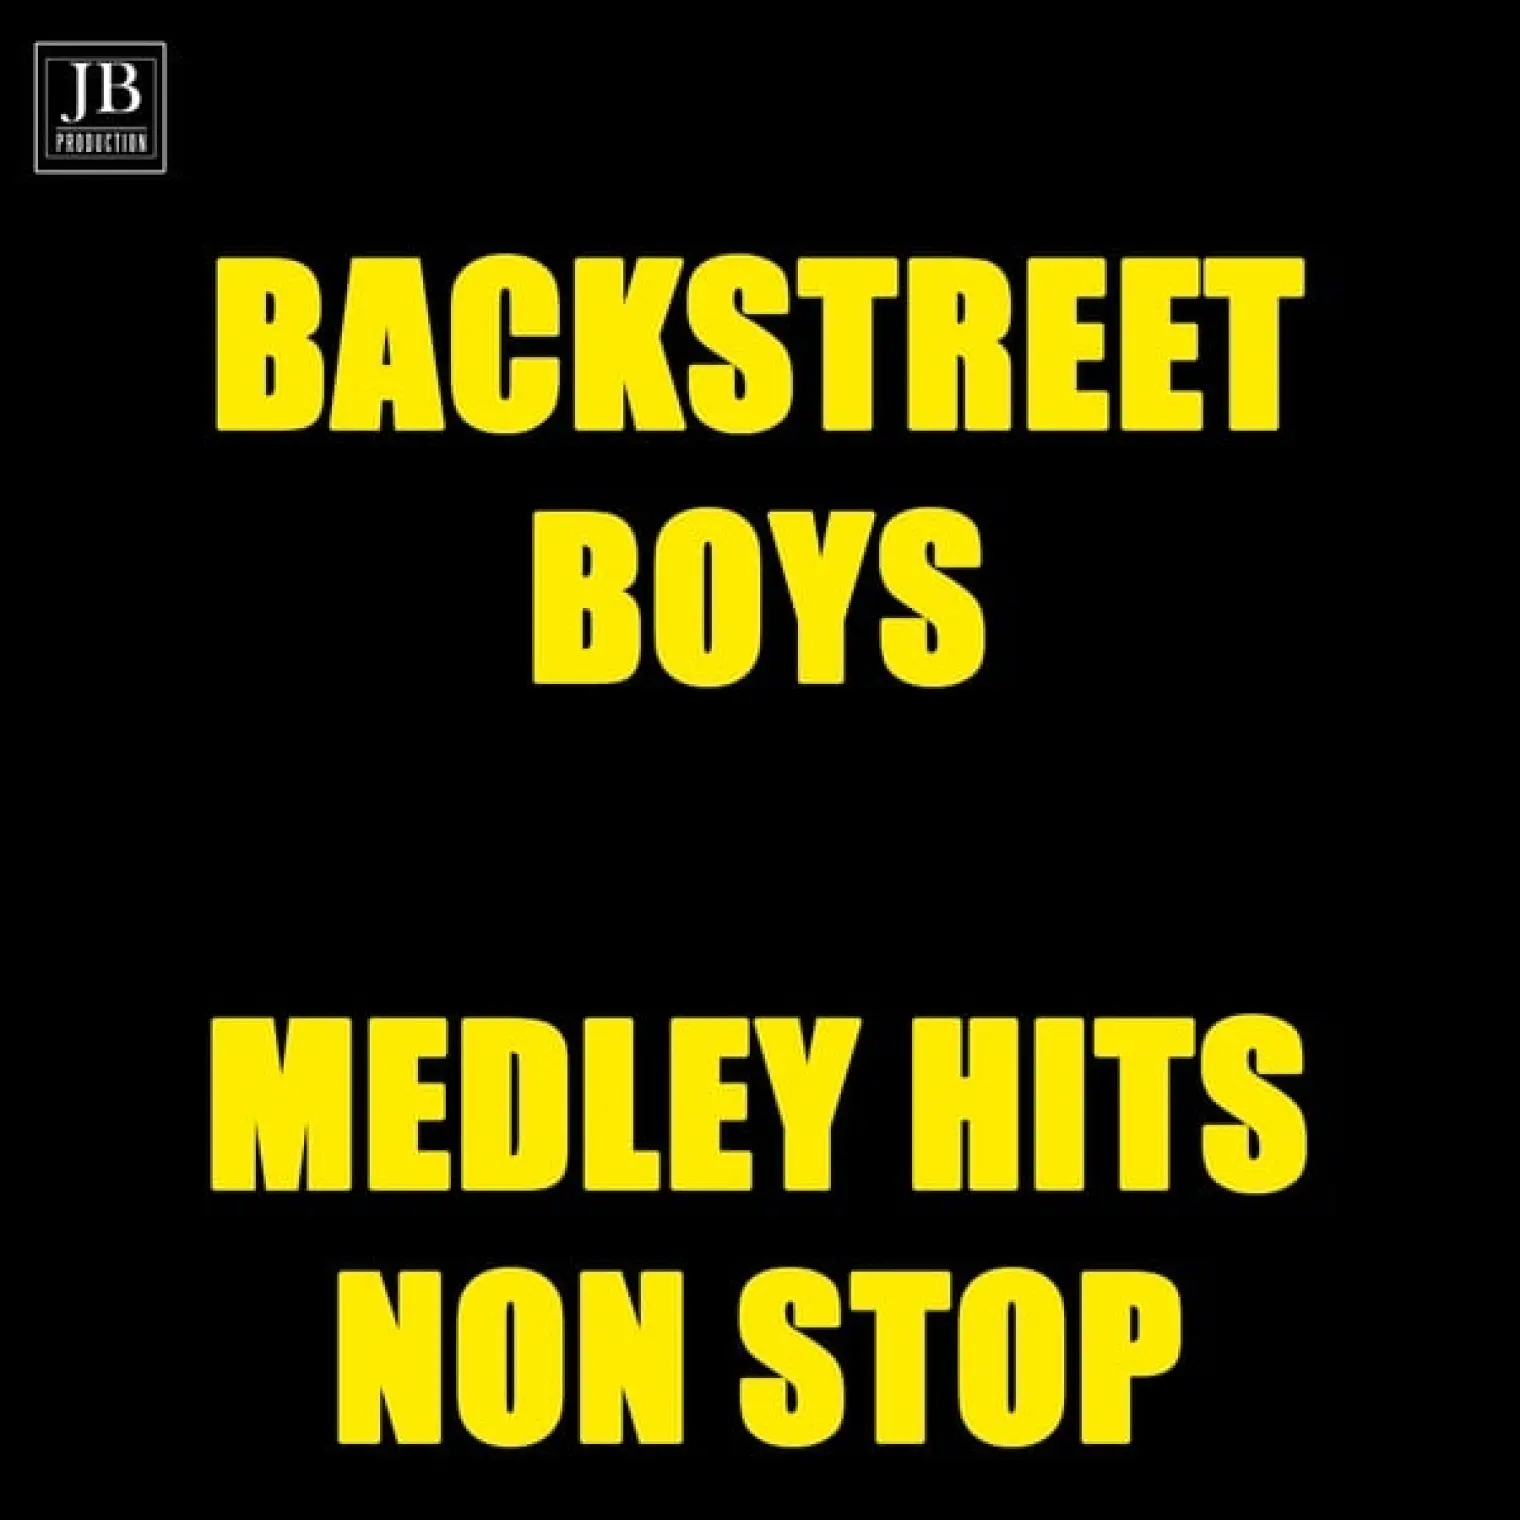 Backstreet Boys Medley: I'll Never Break Your Heart / Get Down / Quit Playin' Games / I Wanna Be with You / Everybody / As Long as You Love Me / Nobody but You / Let's Have a Party / That's the Way I Like It / Hey Mr. DJ / All I Have to Give / 10,000 Prom (Medley Hits Non Stop) -  Silver 